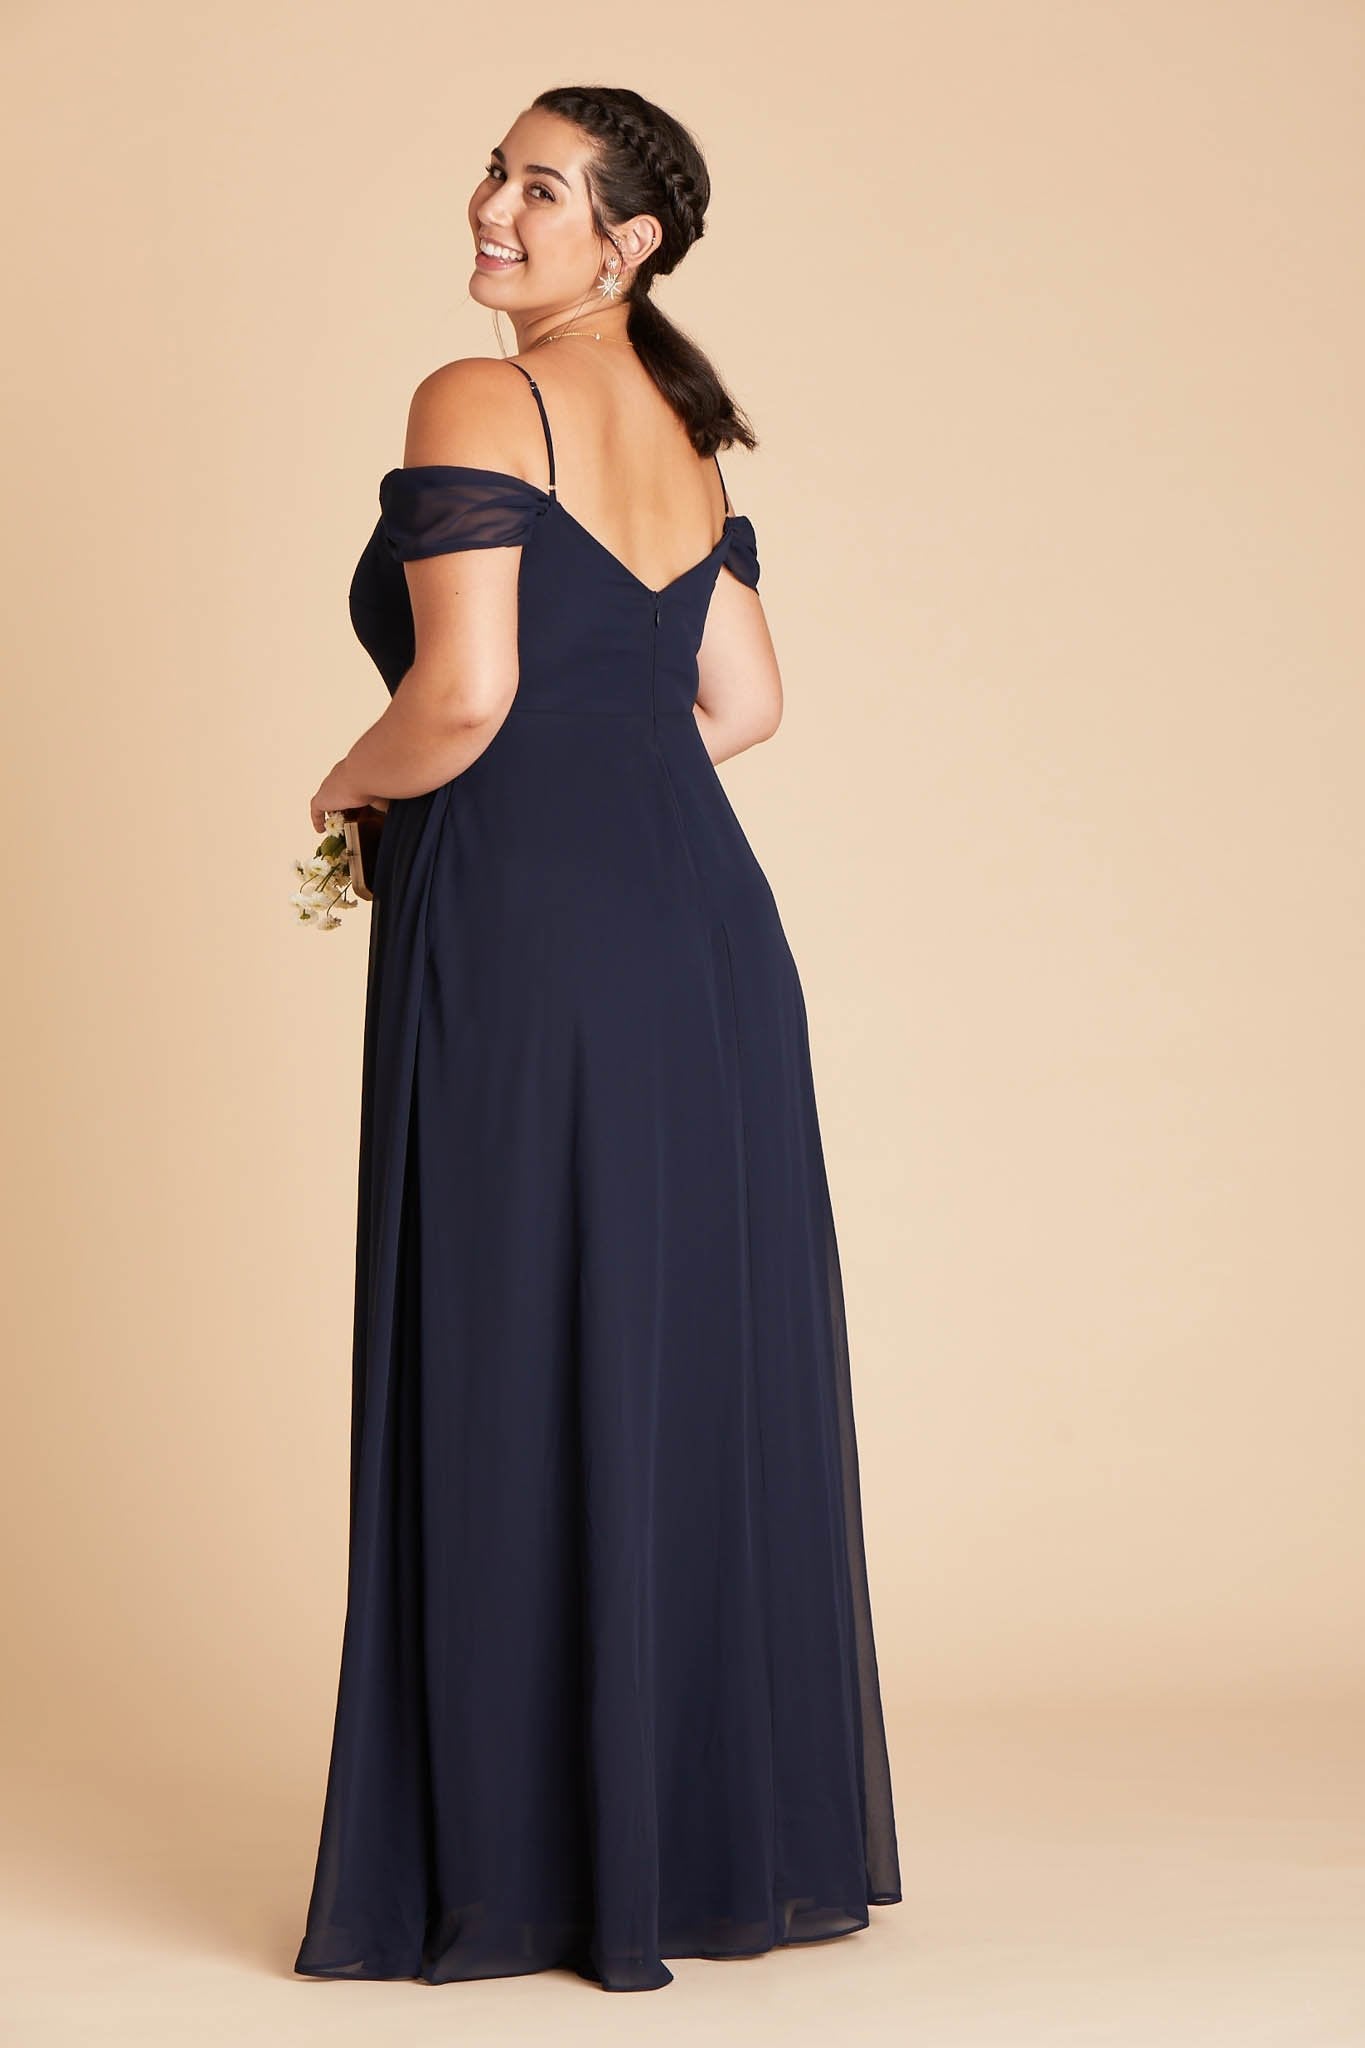 Devin convertible plus size bridesmaids dress in navy blue chiffon by Birdy Grey, side view